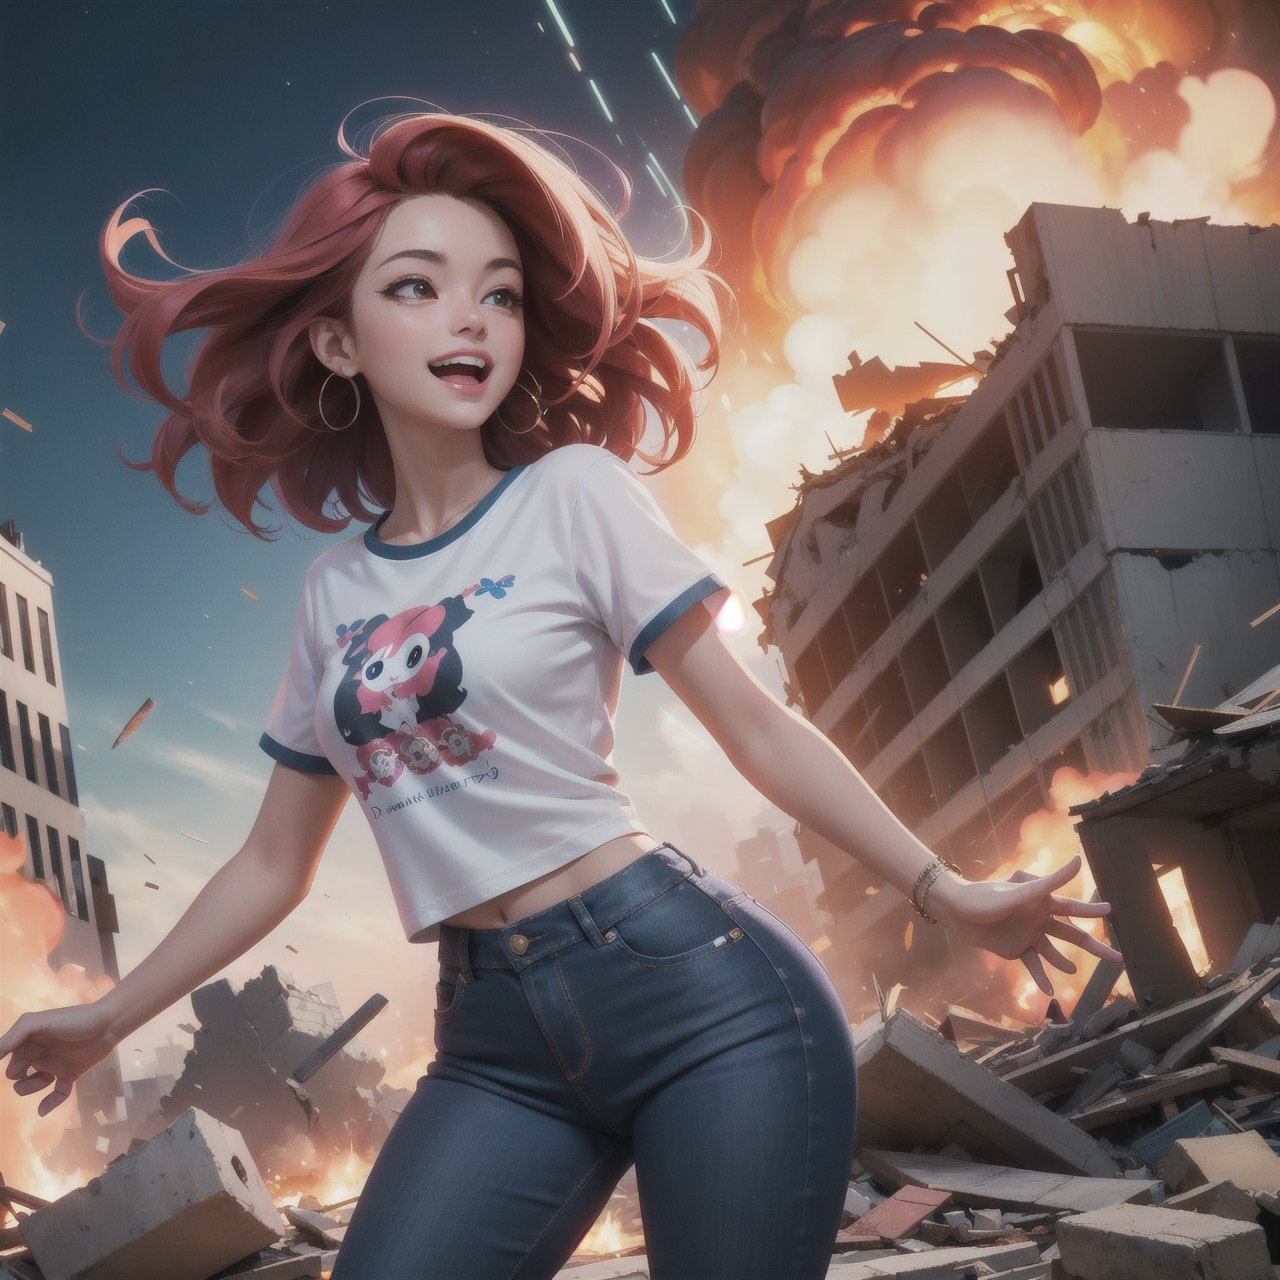 (masterpiece, best quality:1.4), (beautiful, aesthetic, perfect, delicate, intricate:1.2),((atomic explosion in background)), (mass destruction, collapsing buildings, disaster, nightmare, vivid colours), (high contrast), 2 beautiful women, tshirt, blue_jeans, skipping toward camera, laughing at their mobile phones, smiling, perfect face, eyeliner, long wavy windswept red hair, large_breasts, depth of field